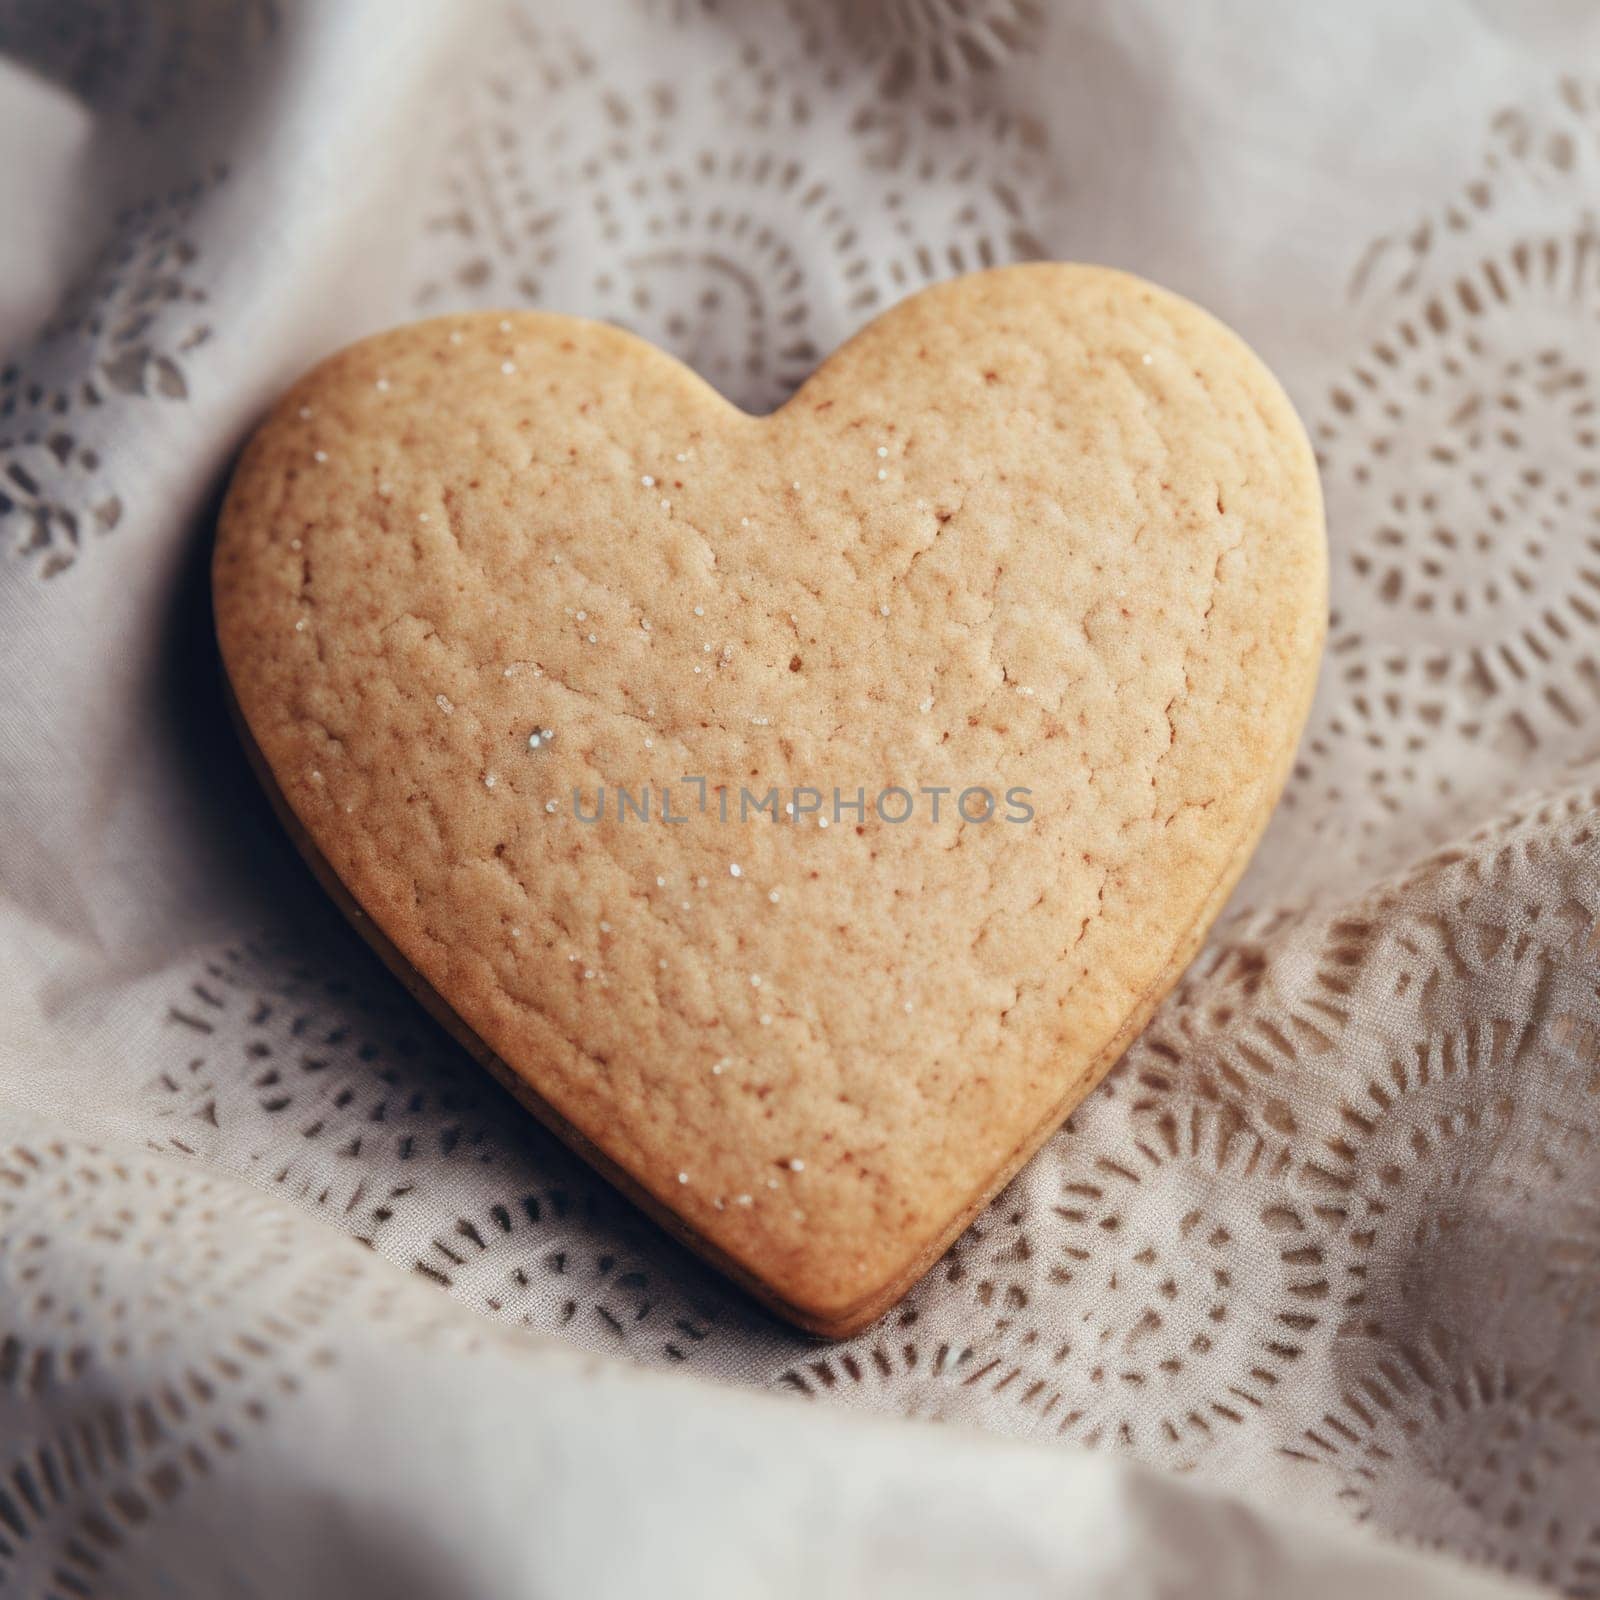 A heart shaped cookie on a lace tablecloth